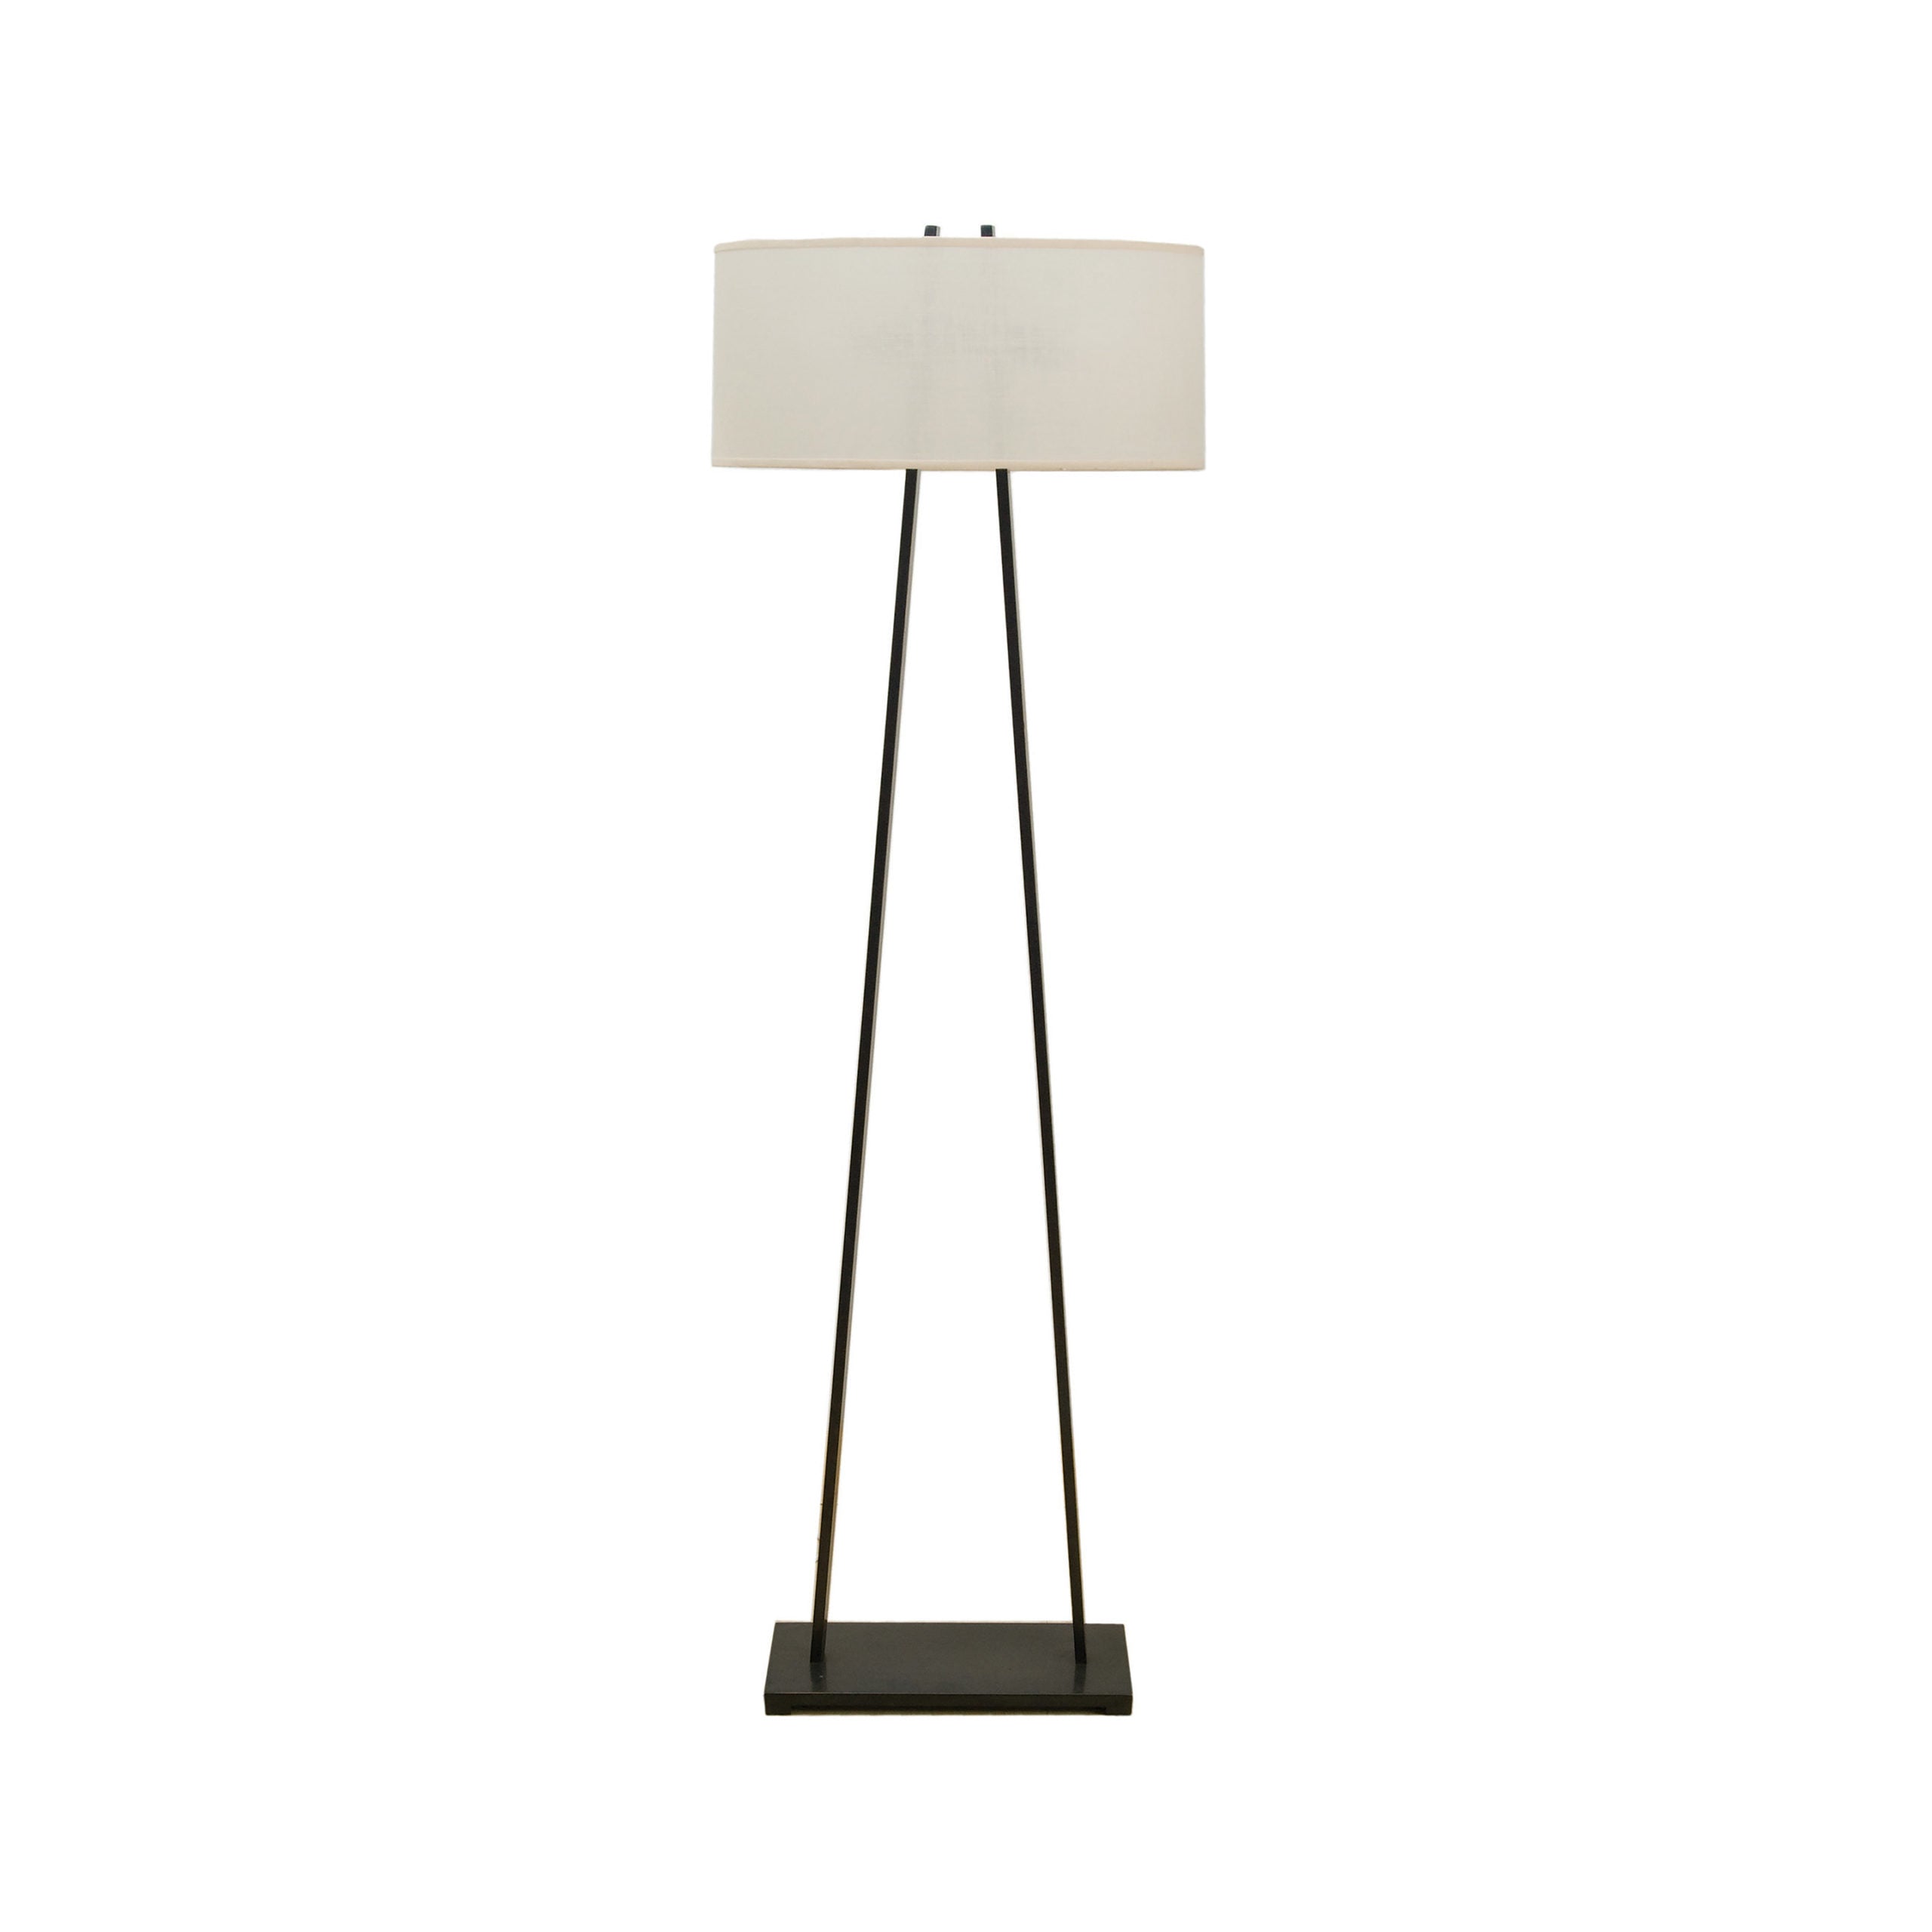 "A" Frame Bronze Floor Lamp with Oval Shade